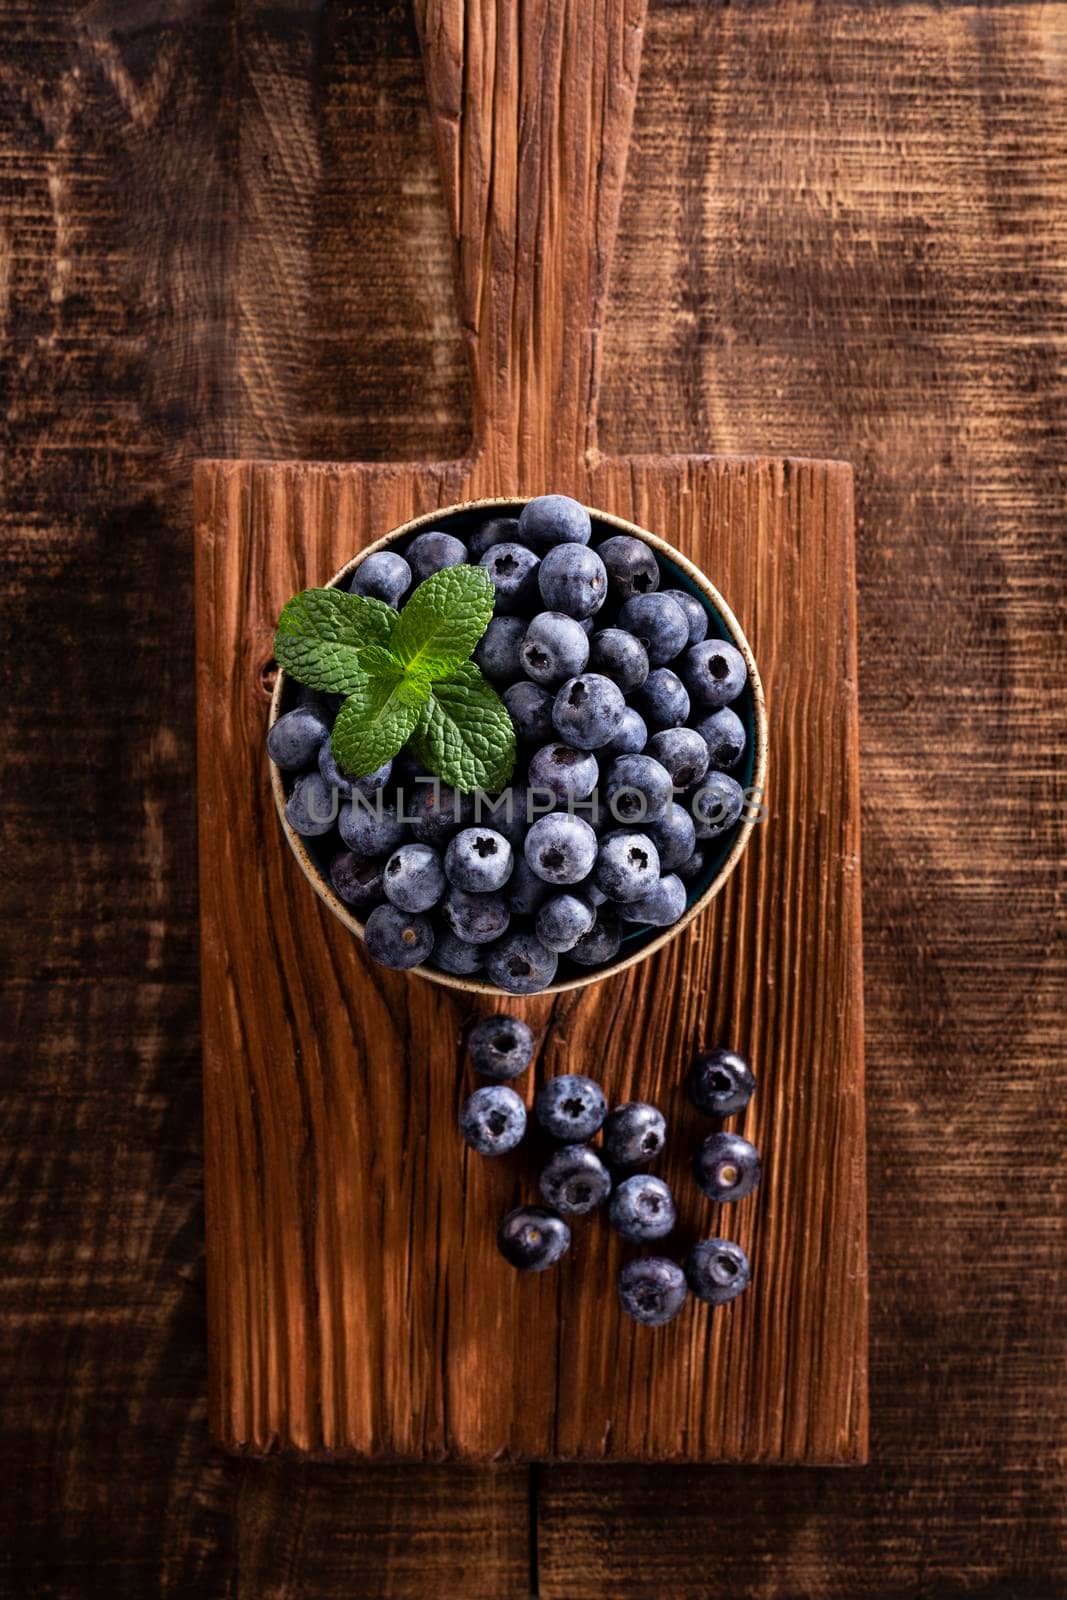 Bowl of fresh blueberries on rustic wooden board. Organic food blueberries and mint leaf for healthy lifestyle.